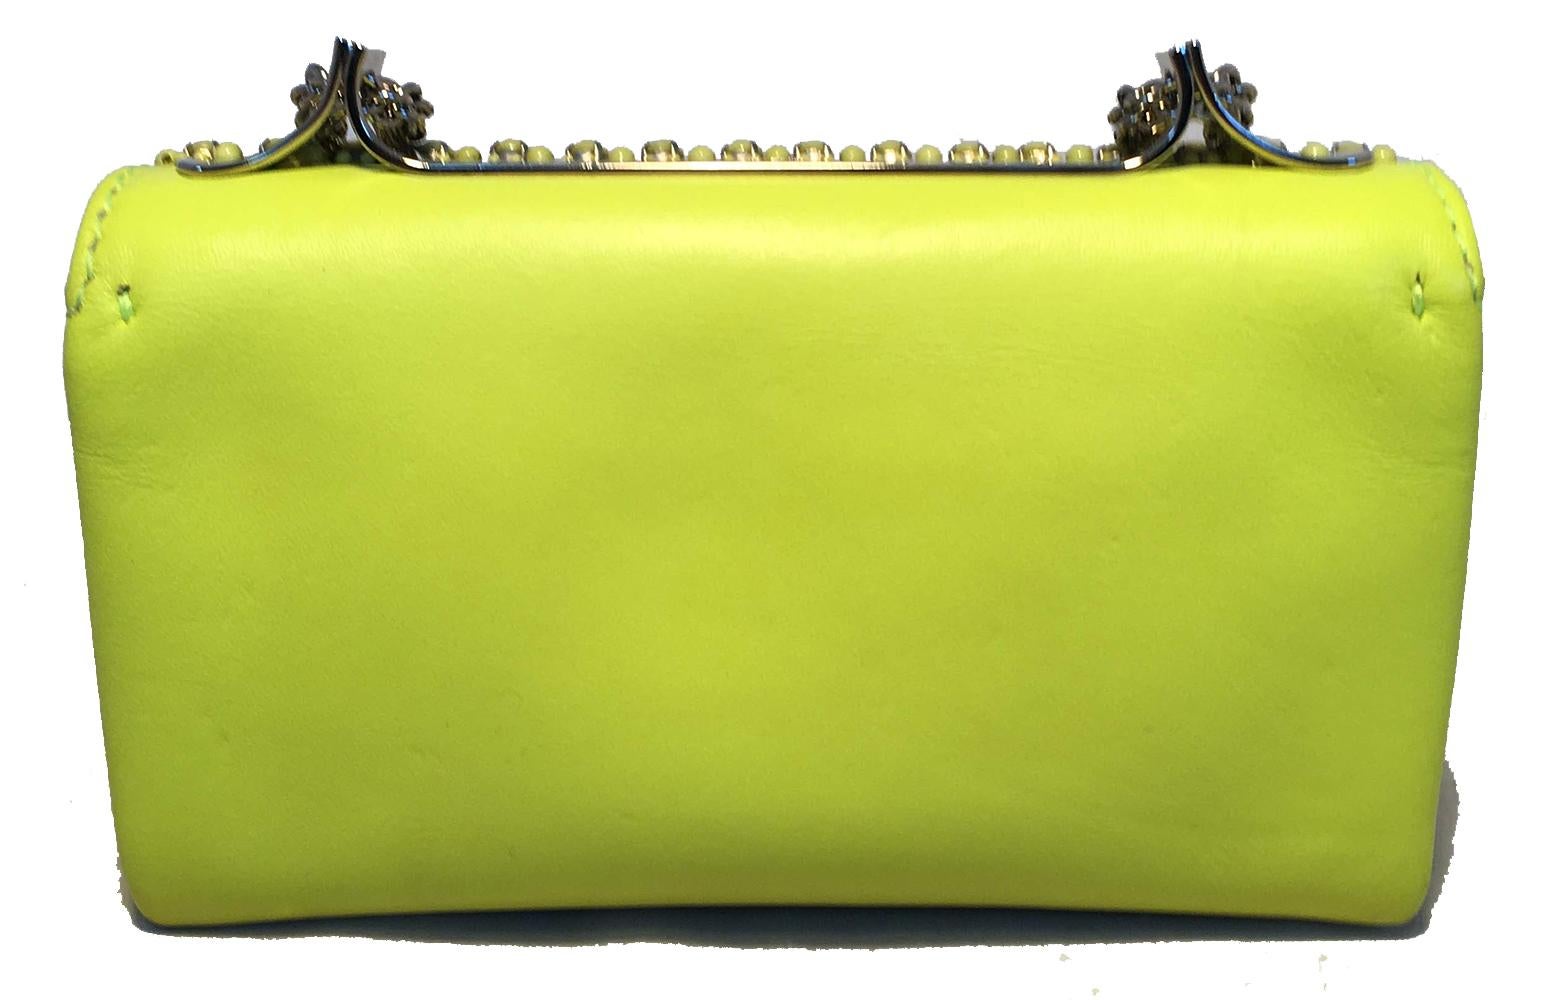 Valentino Garavani Va Va Voom Neon Studded Knuckle Clutch with Strap in excellent condition. Neon yellow/lime green leather and studded exterior trimmed with silver hardware and chain shoulder strap. Unique knuckle front handle to use as clutch.